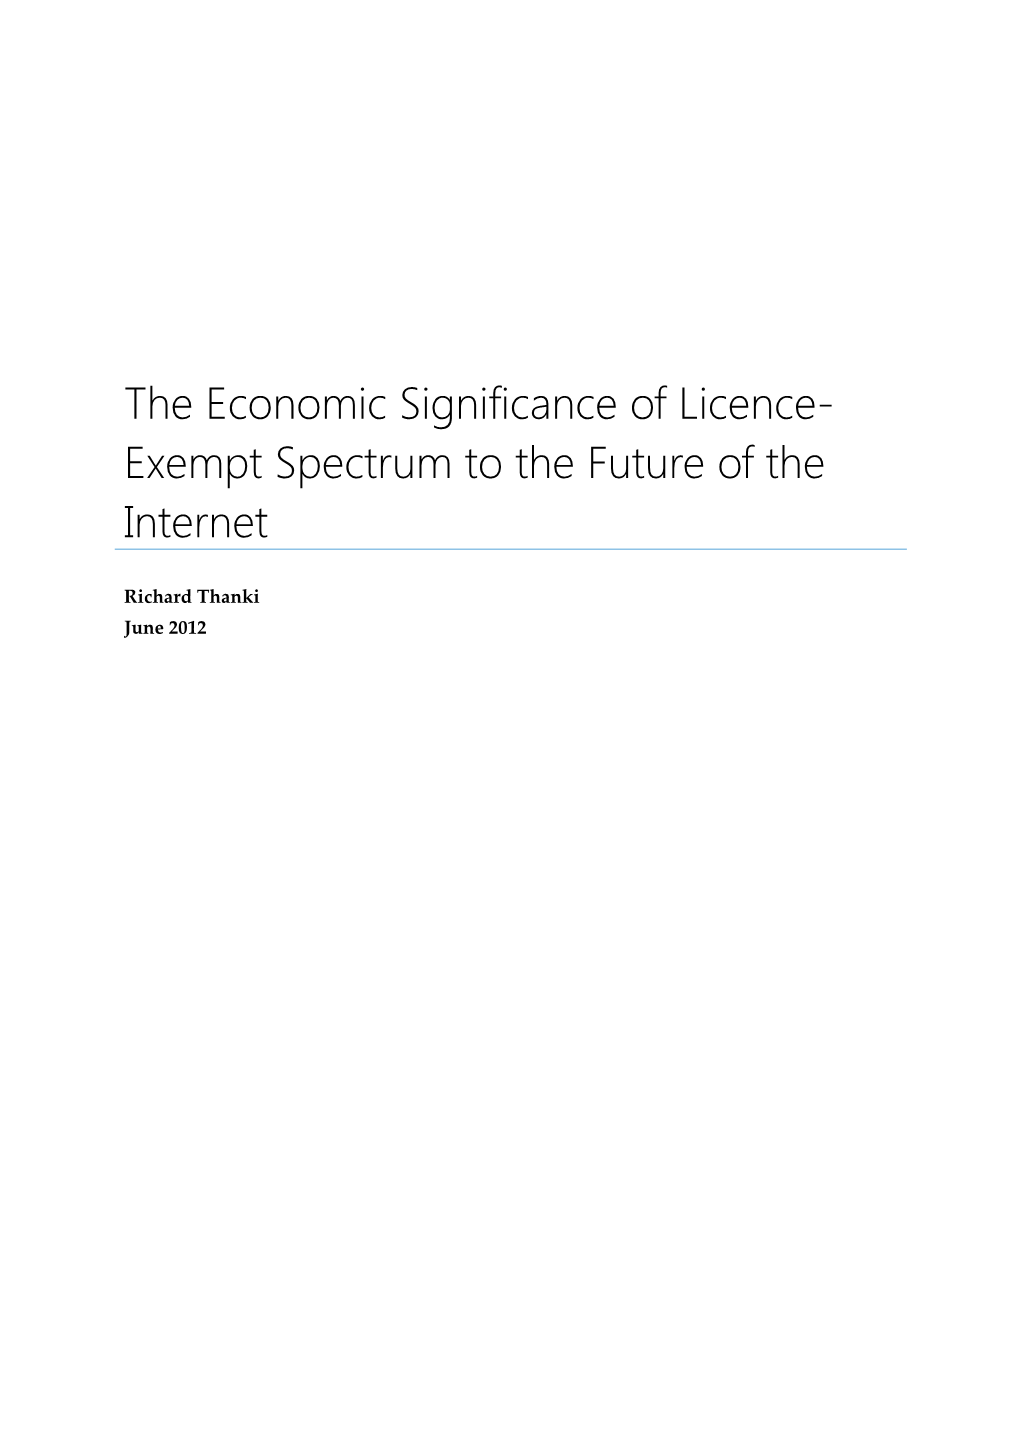 The Economic Significance of Licence- Exempt Spectrum to the Future of the Internet